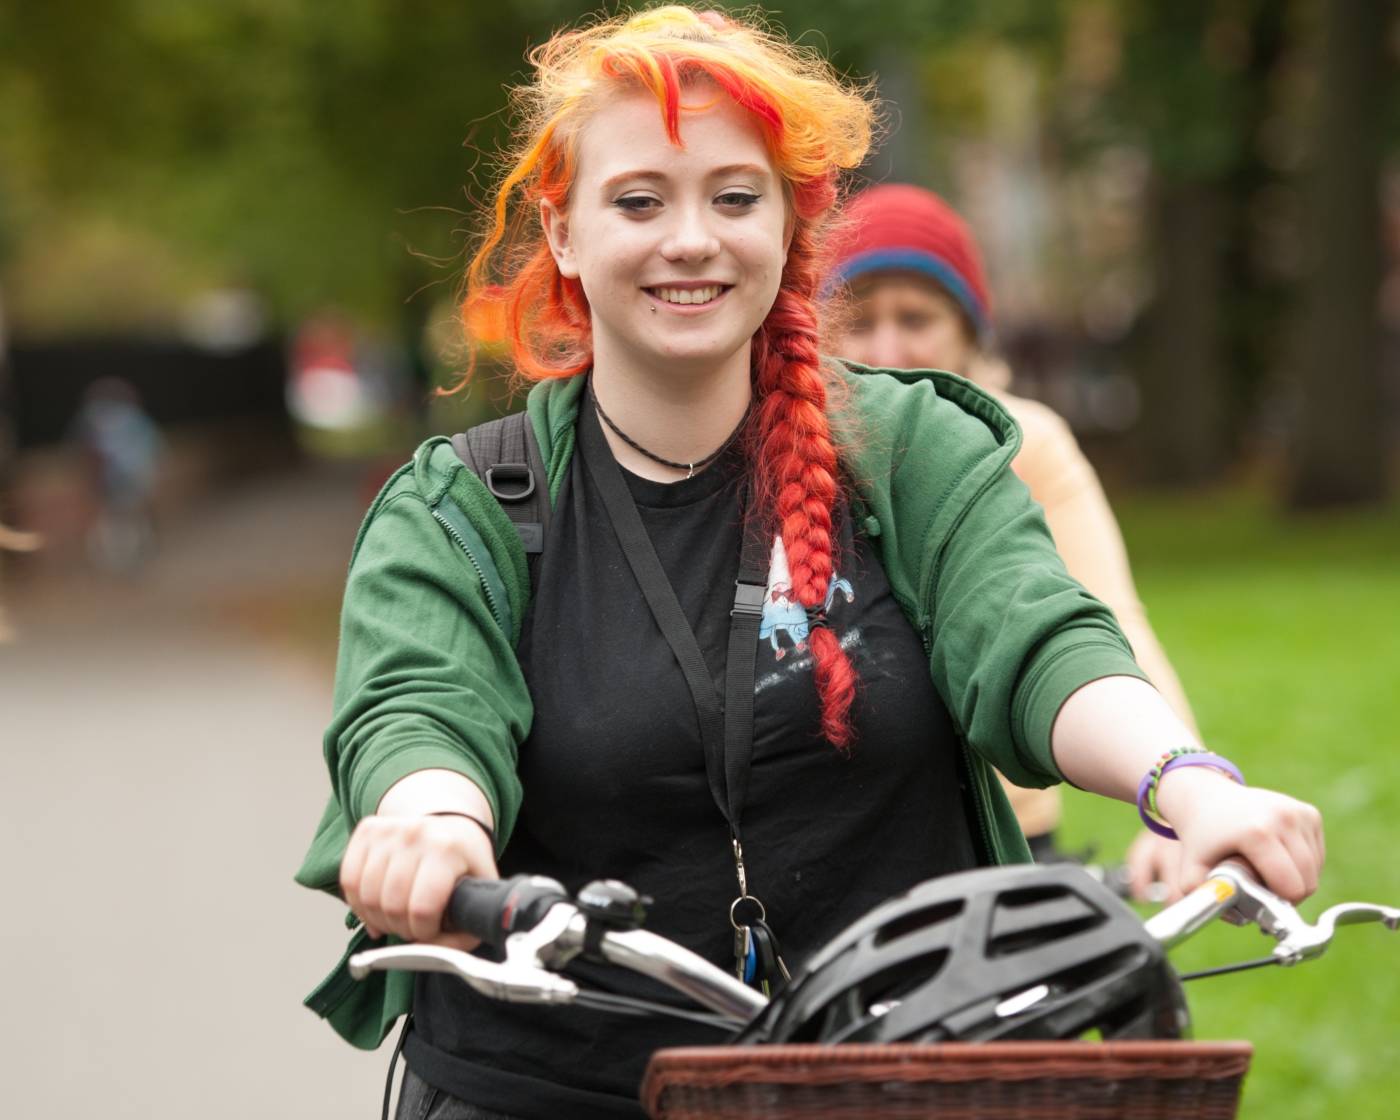 Image: red haired woman smiling on a bike with a basket